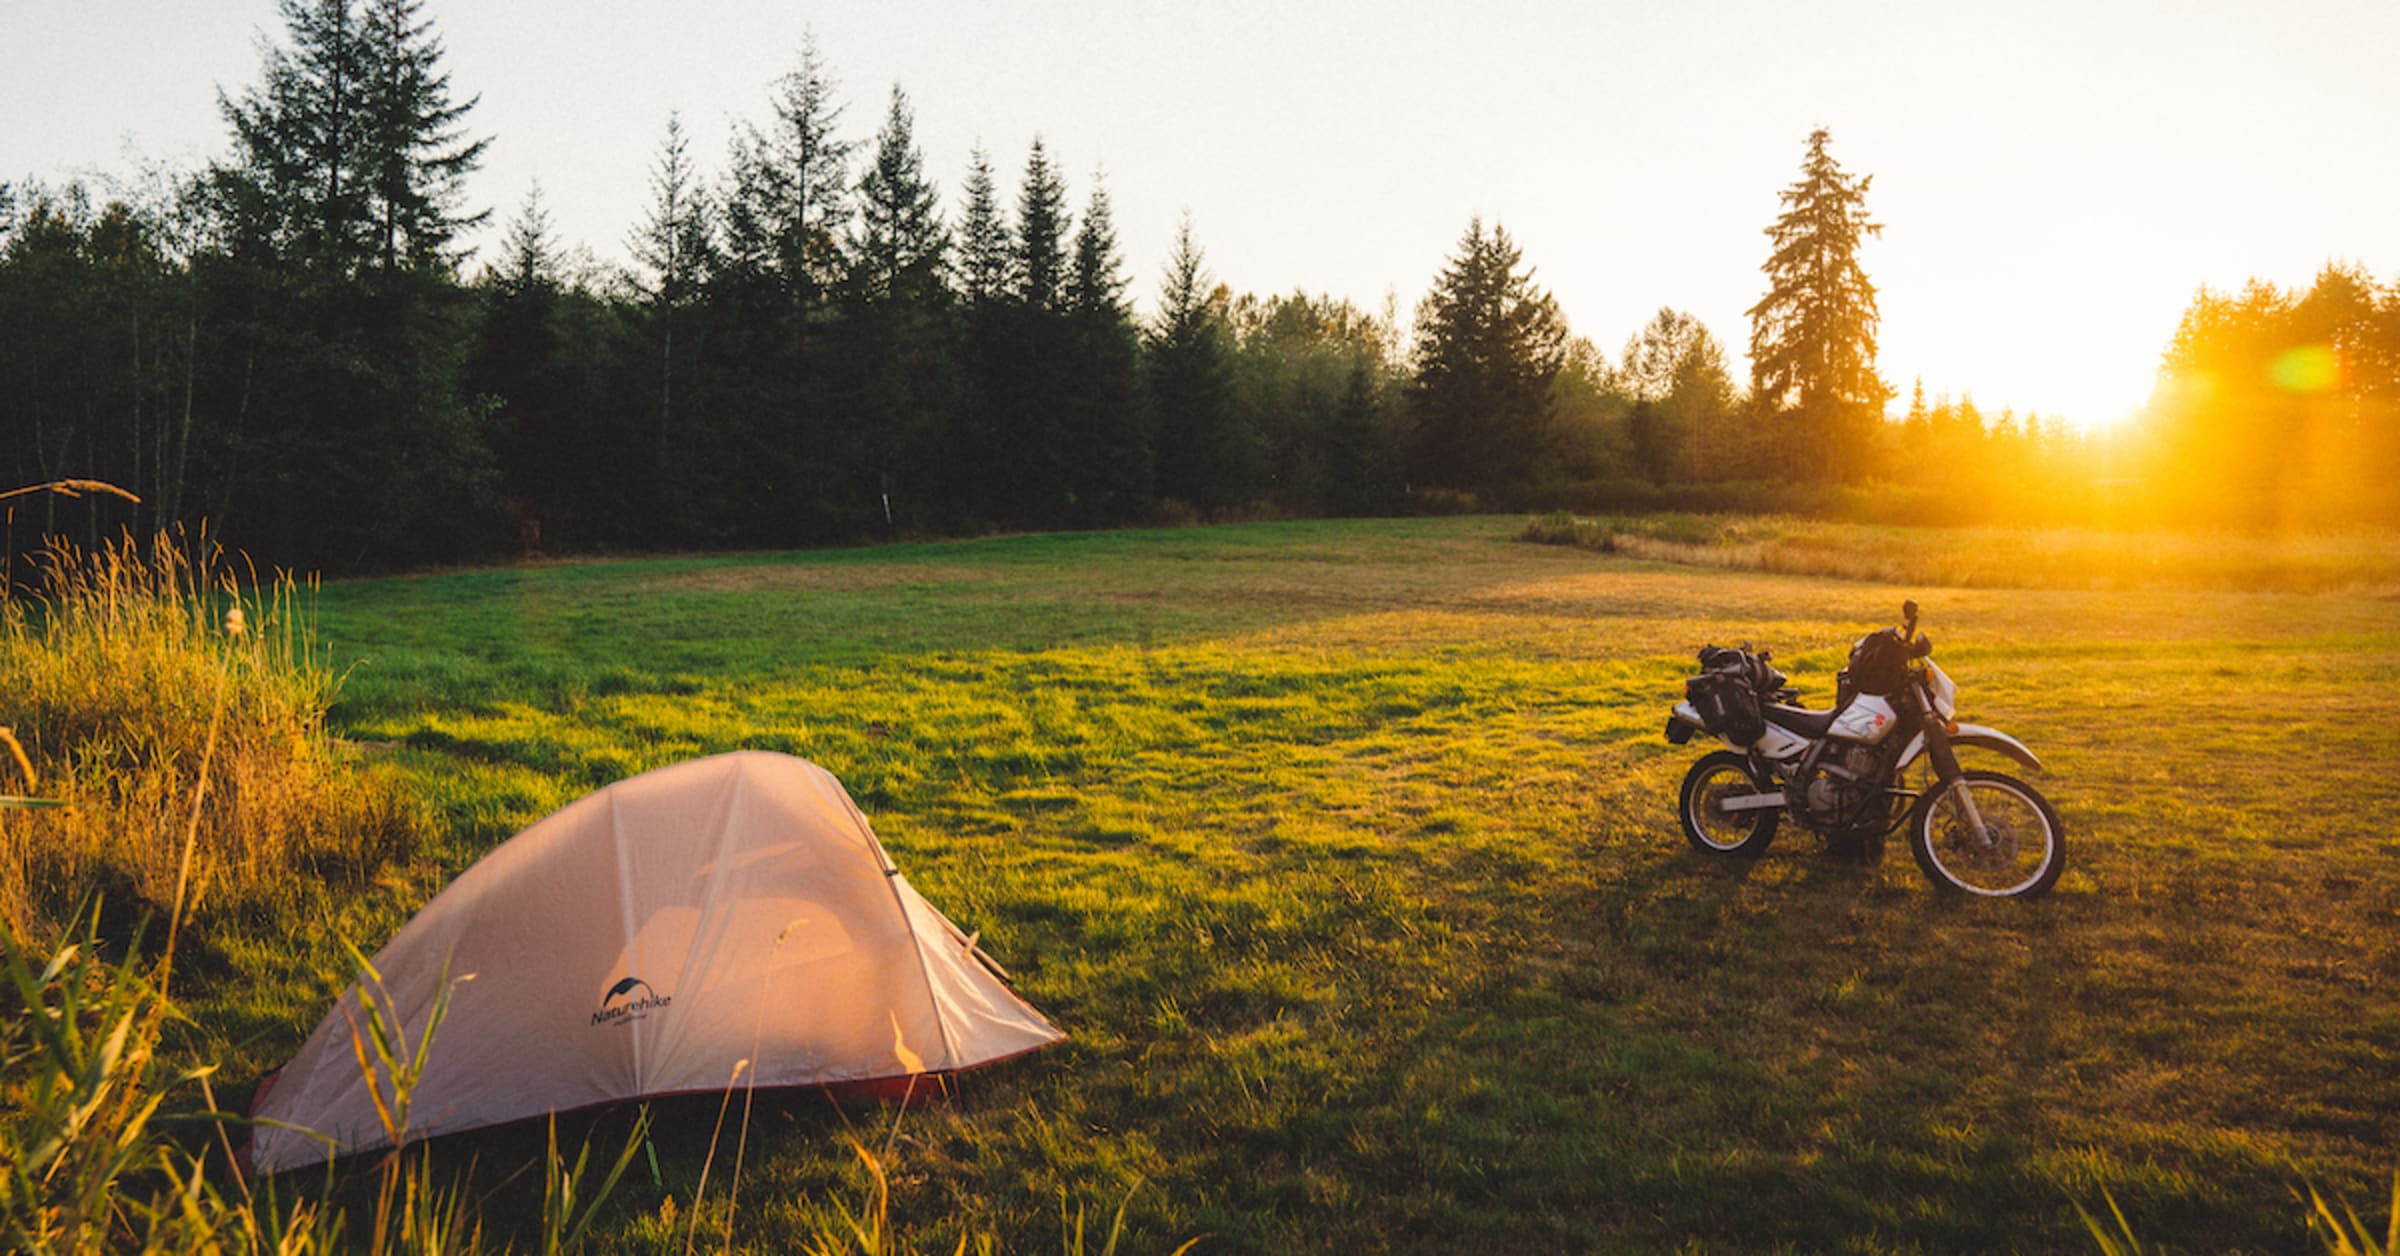 A Motocamping Adventure Guide From a Hipcamp Photographer